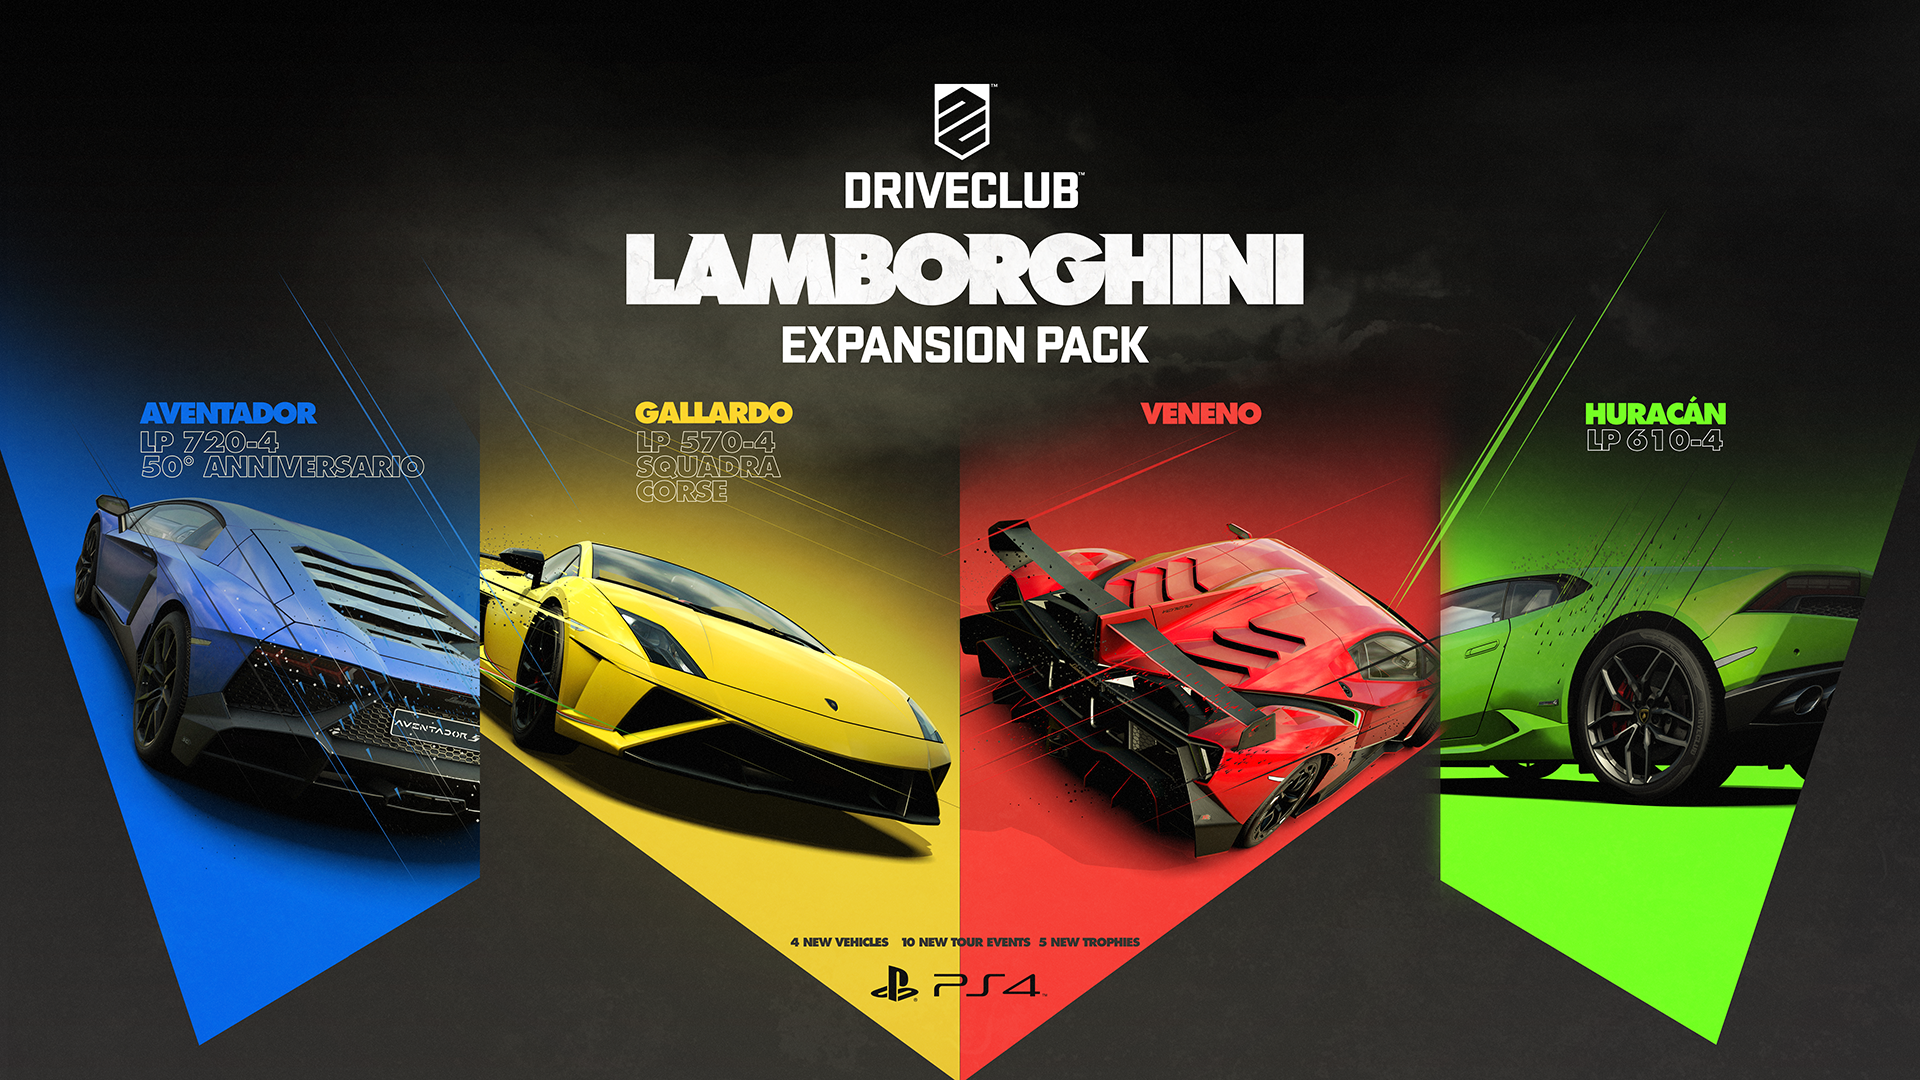 PS4 Exclusive Driveclubs New 1080p Lamborghini Pictures Could Be